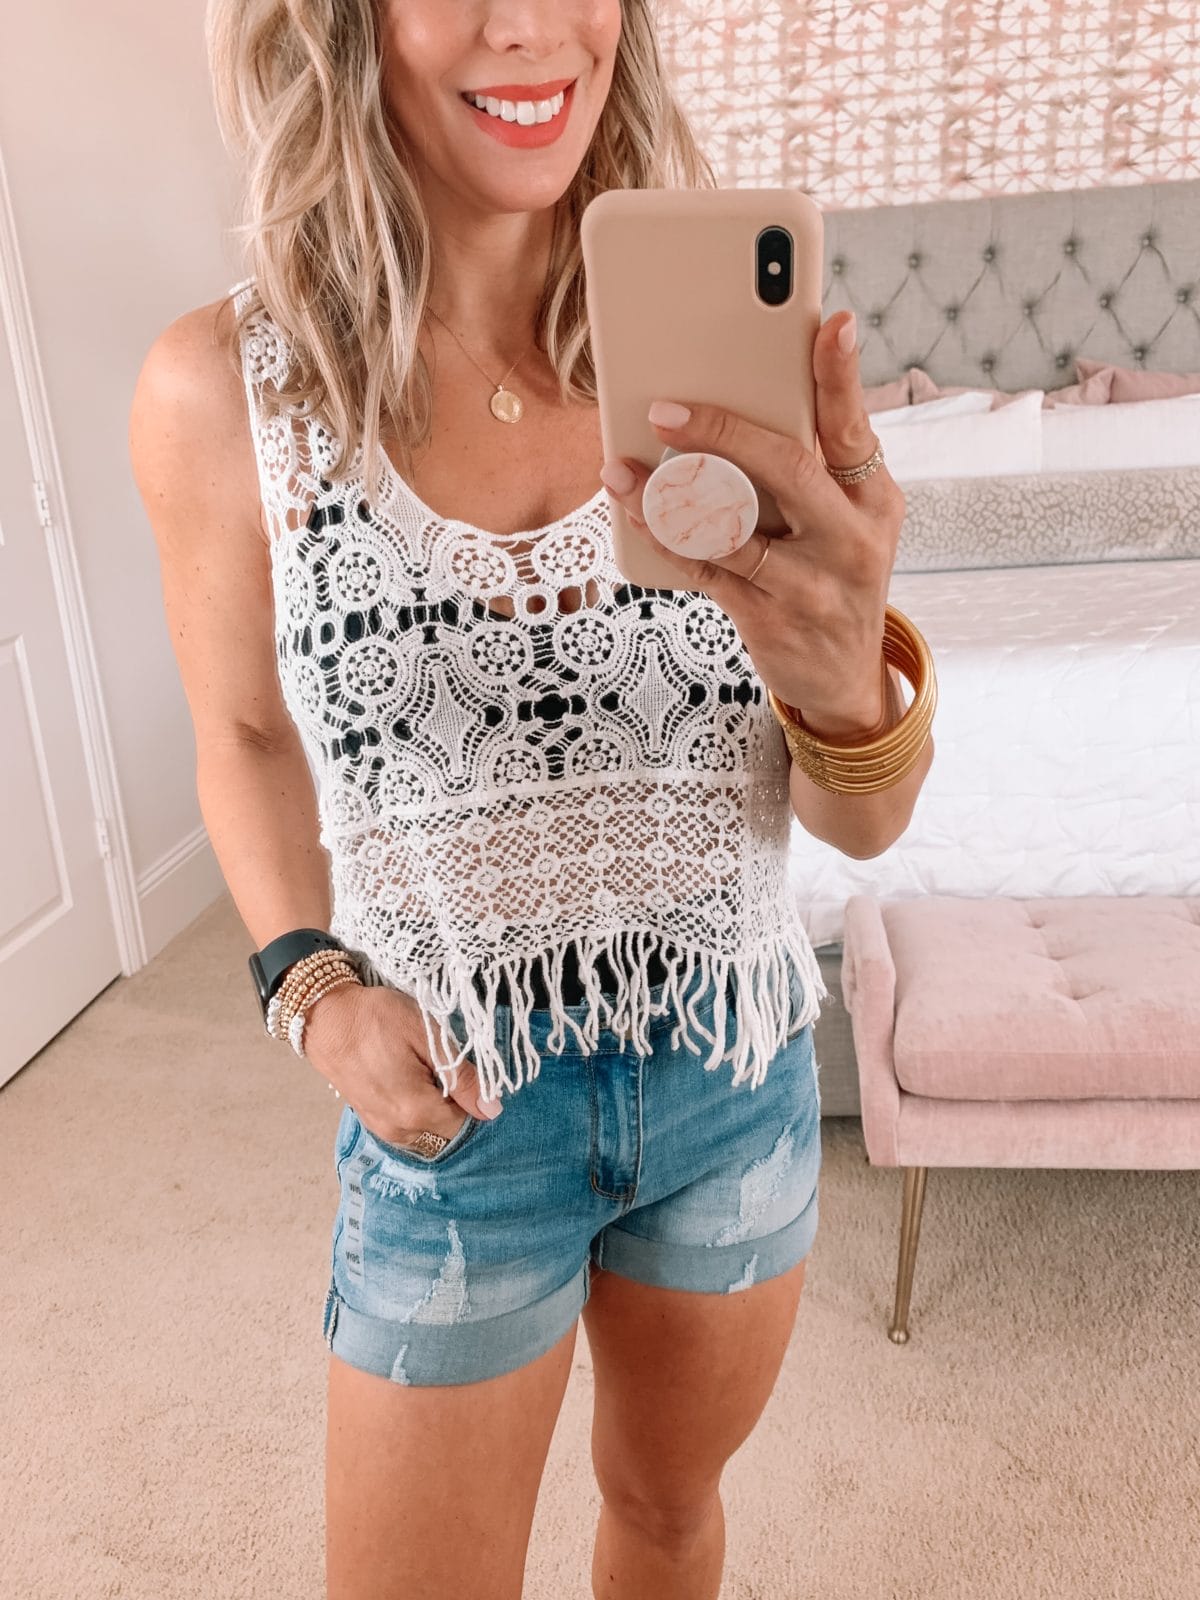 Amazon Fashion Faves, Cover up Crop Top, Jean Shorts, Sandals 